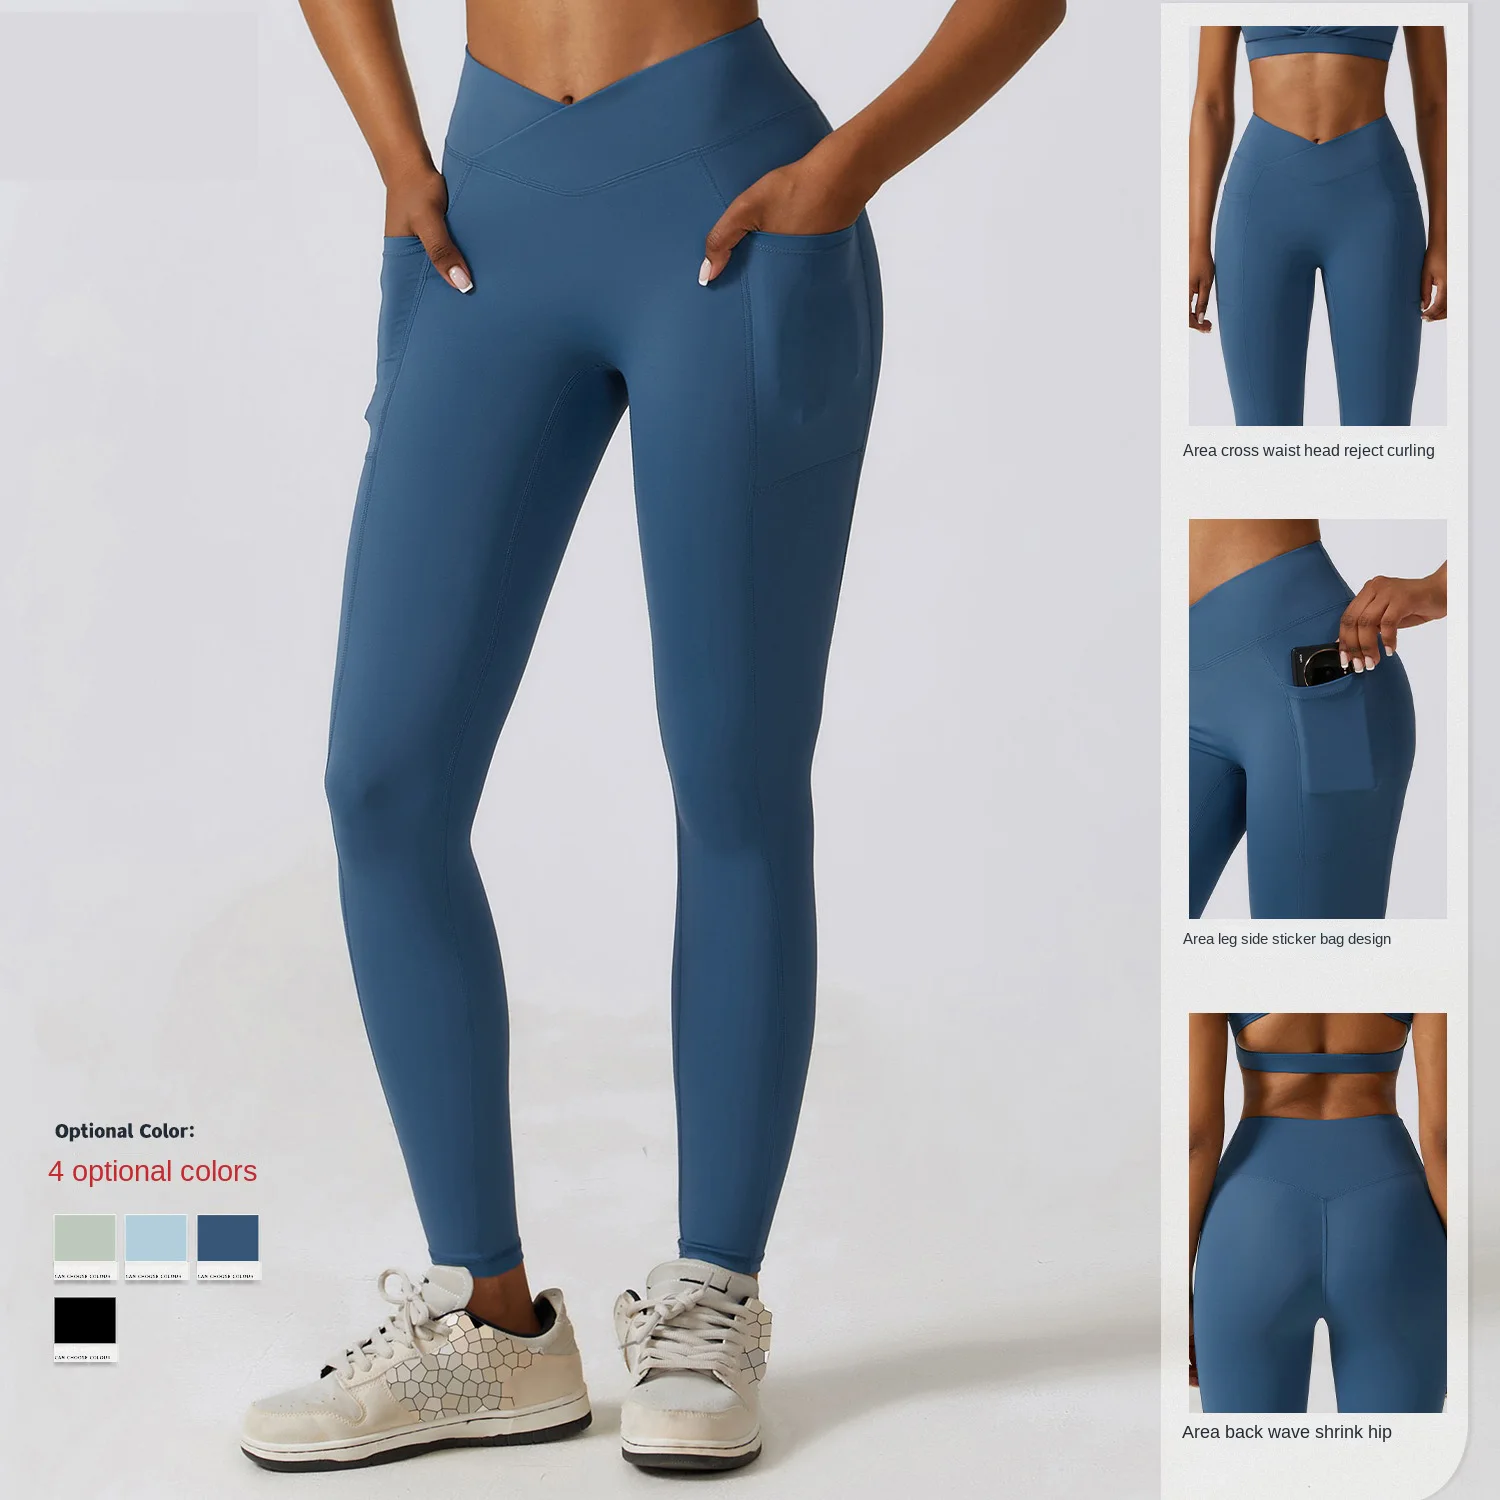 

Peach Lifting Fitness Pants Women's Quick-Drying Tight Running Sports Pants with Pockets Nude-Feel High-Waisted Yoga Leggings